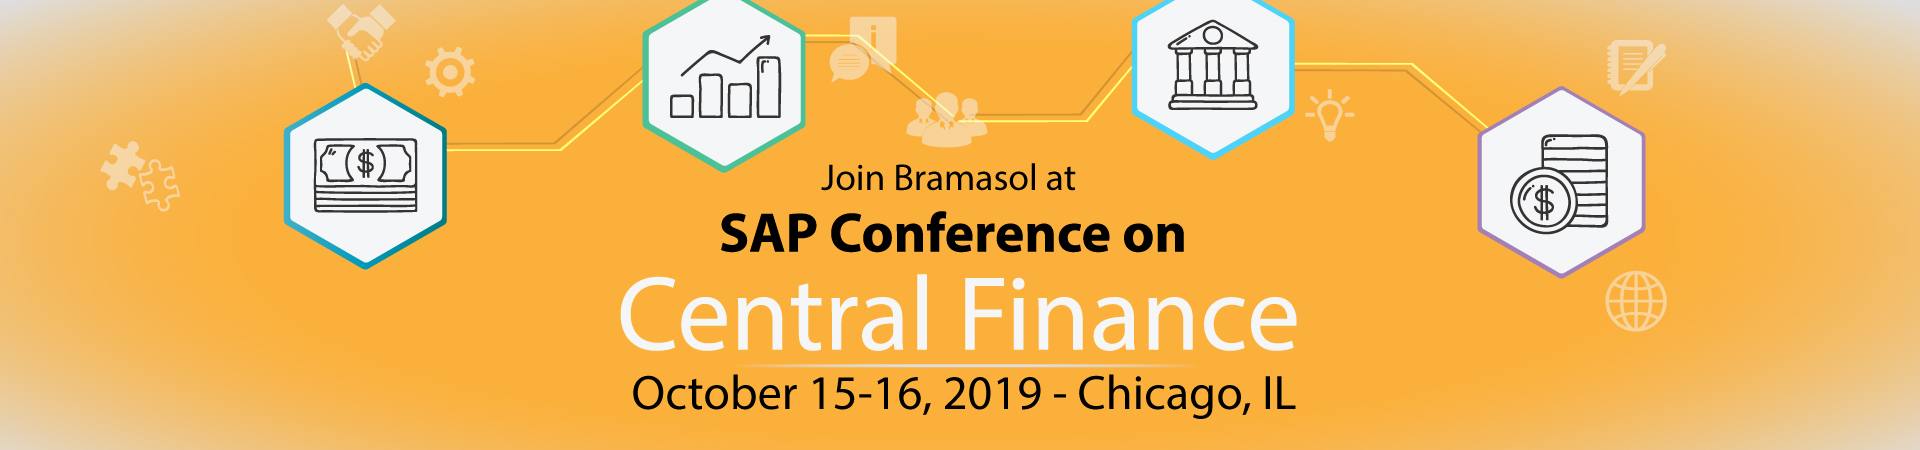 SAP Conference on Central Finance